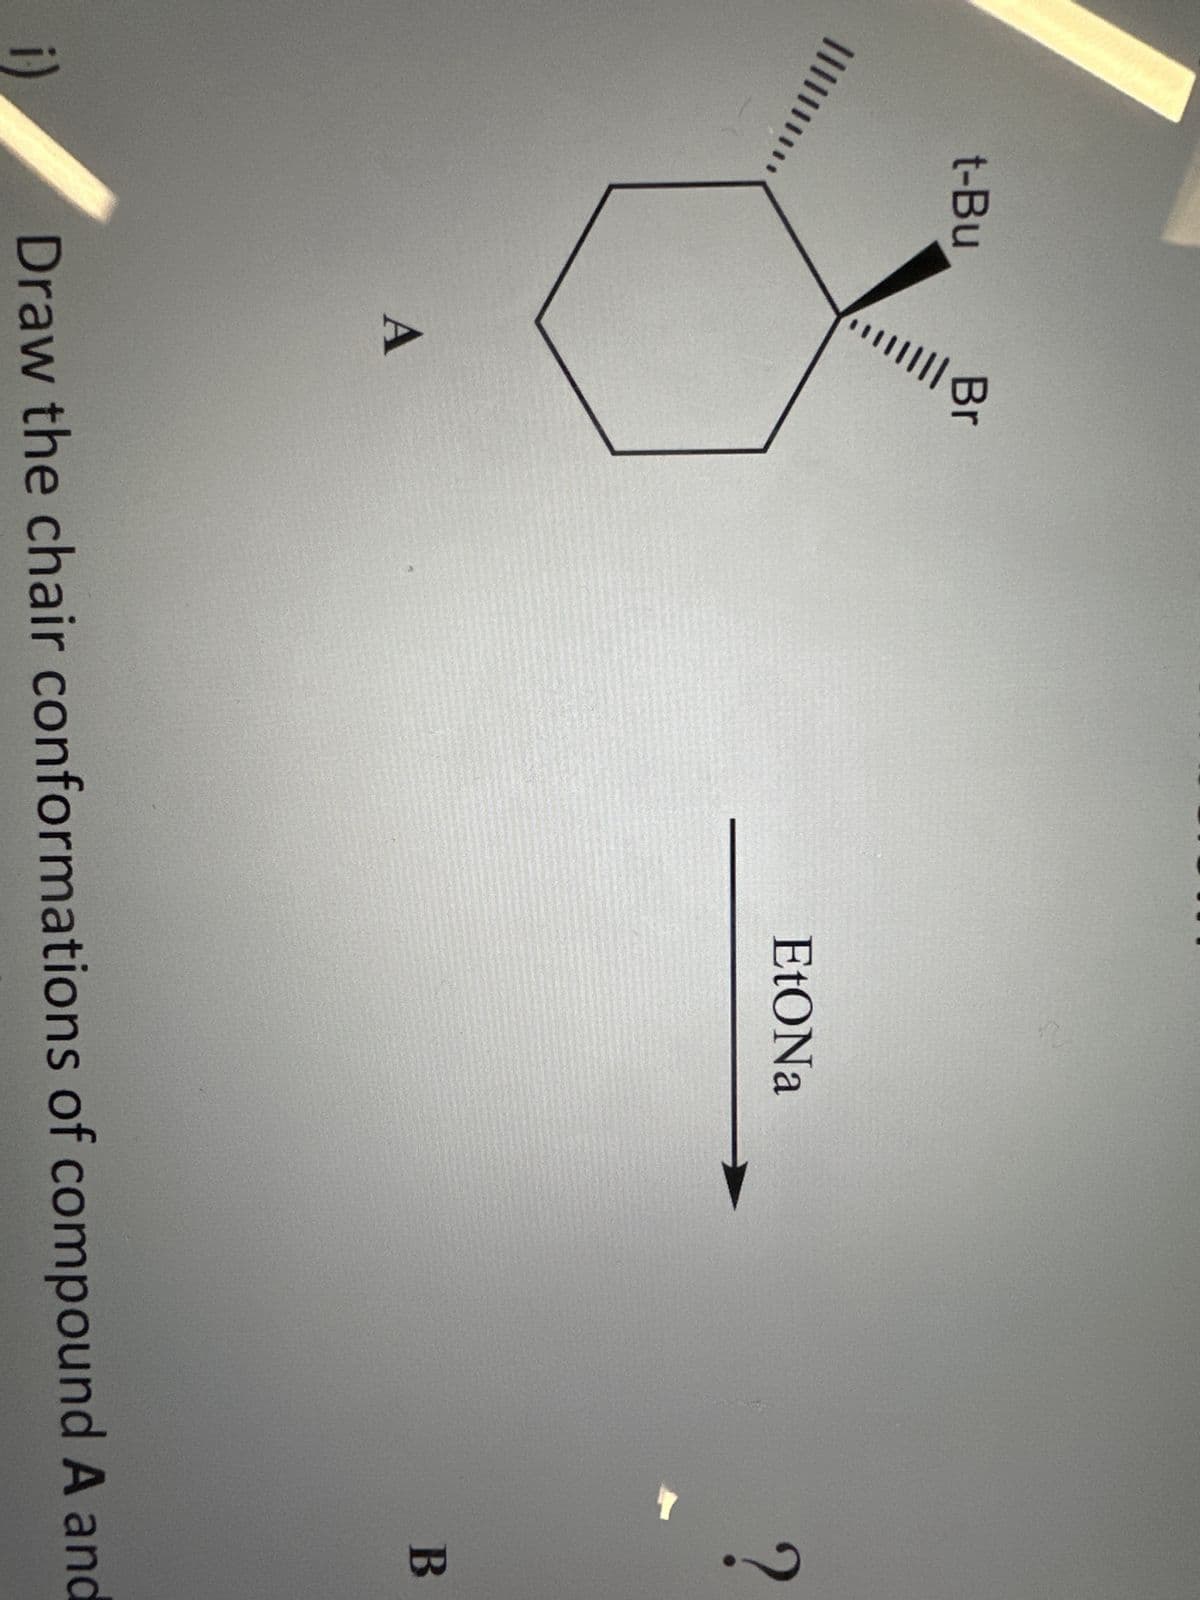 t-Bu
A
B
|||
EtONa
?
B
Draw the chair conformations of compound A and